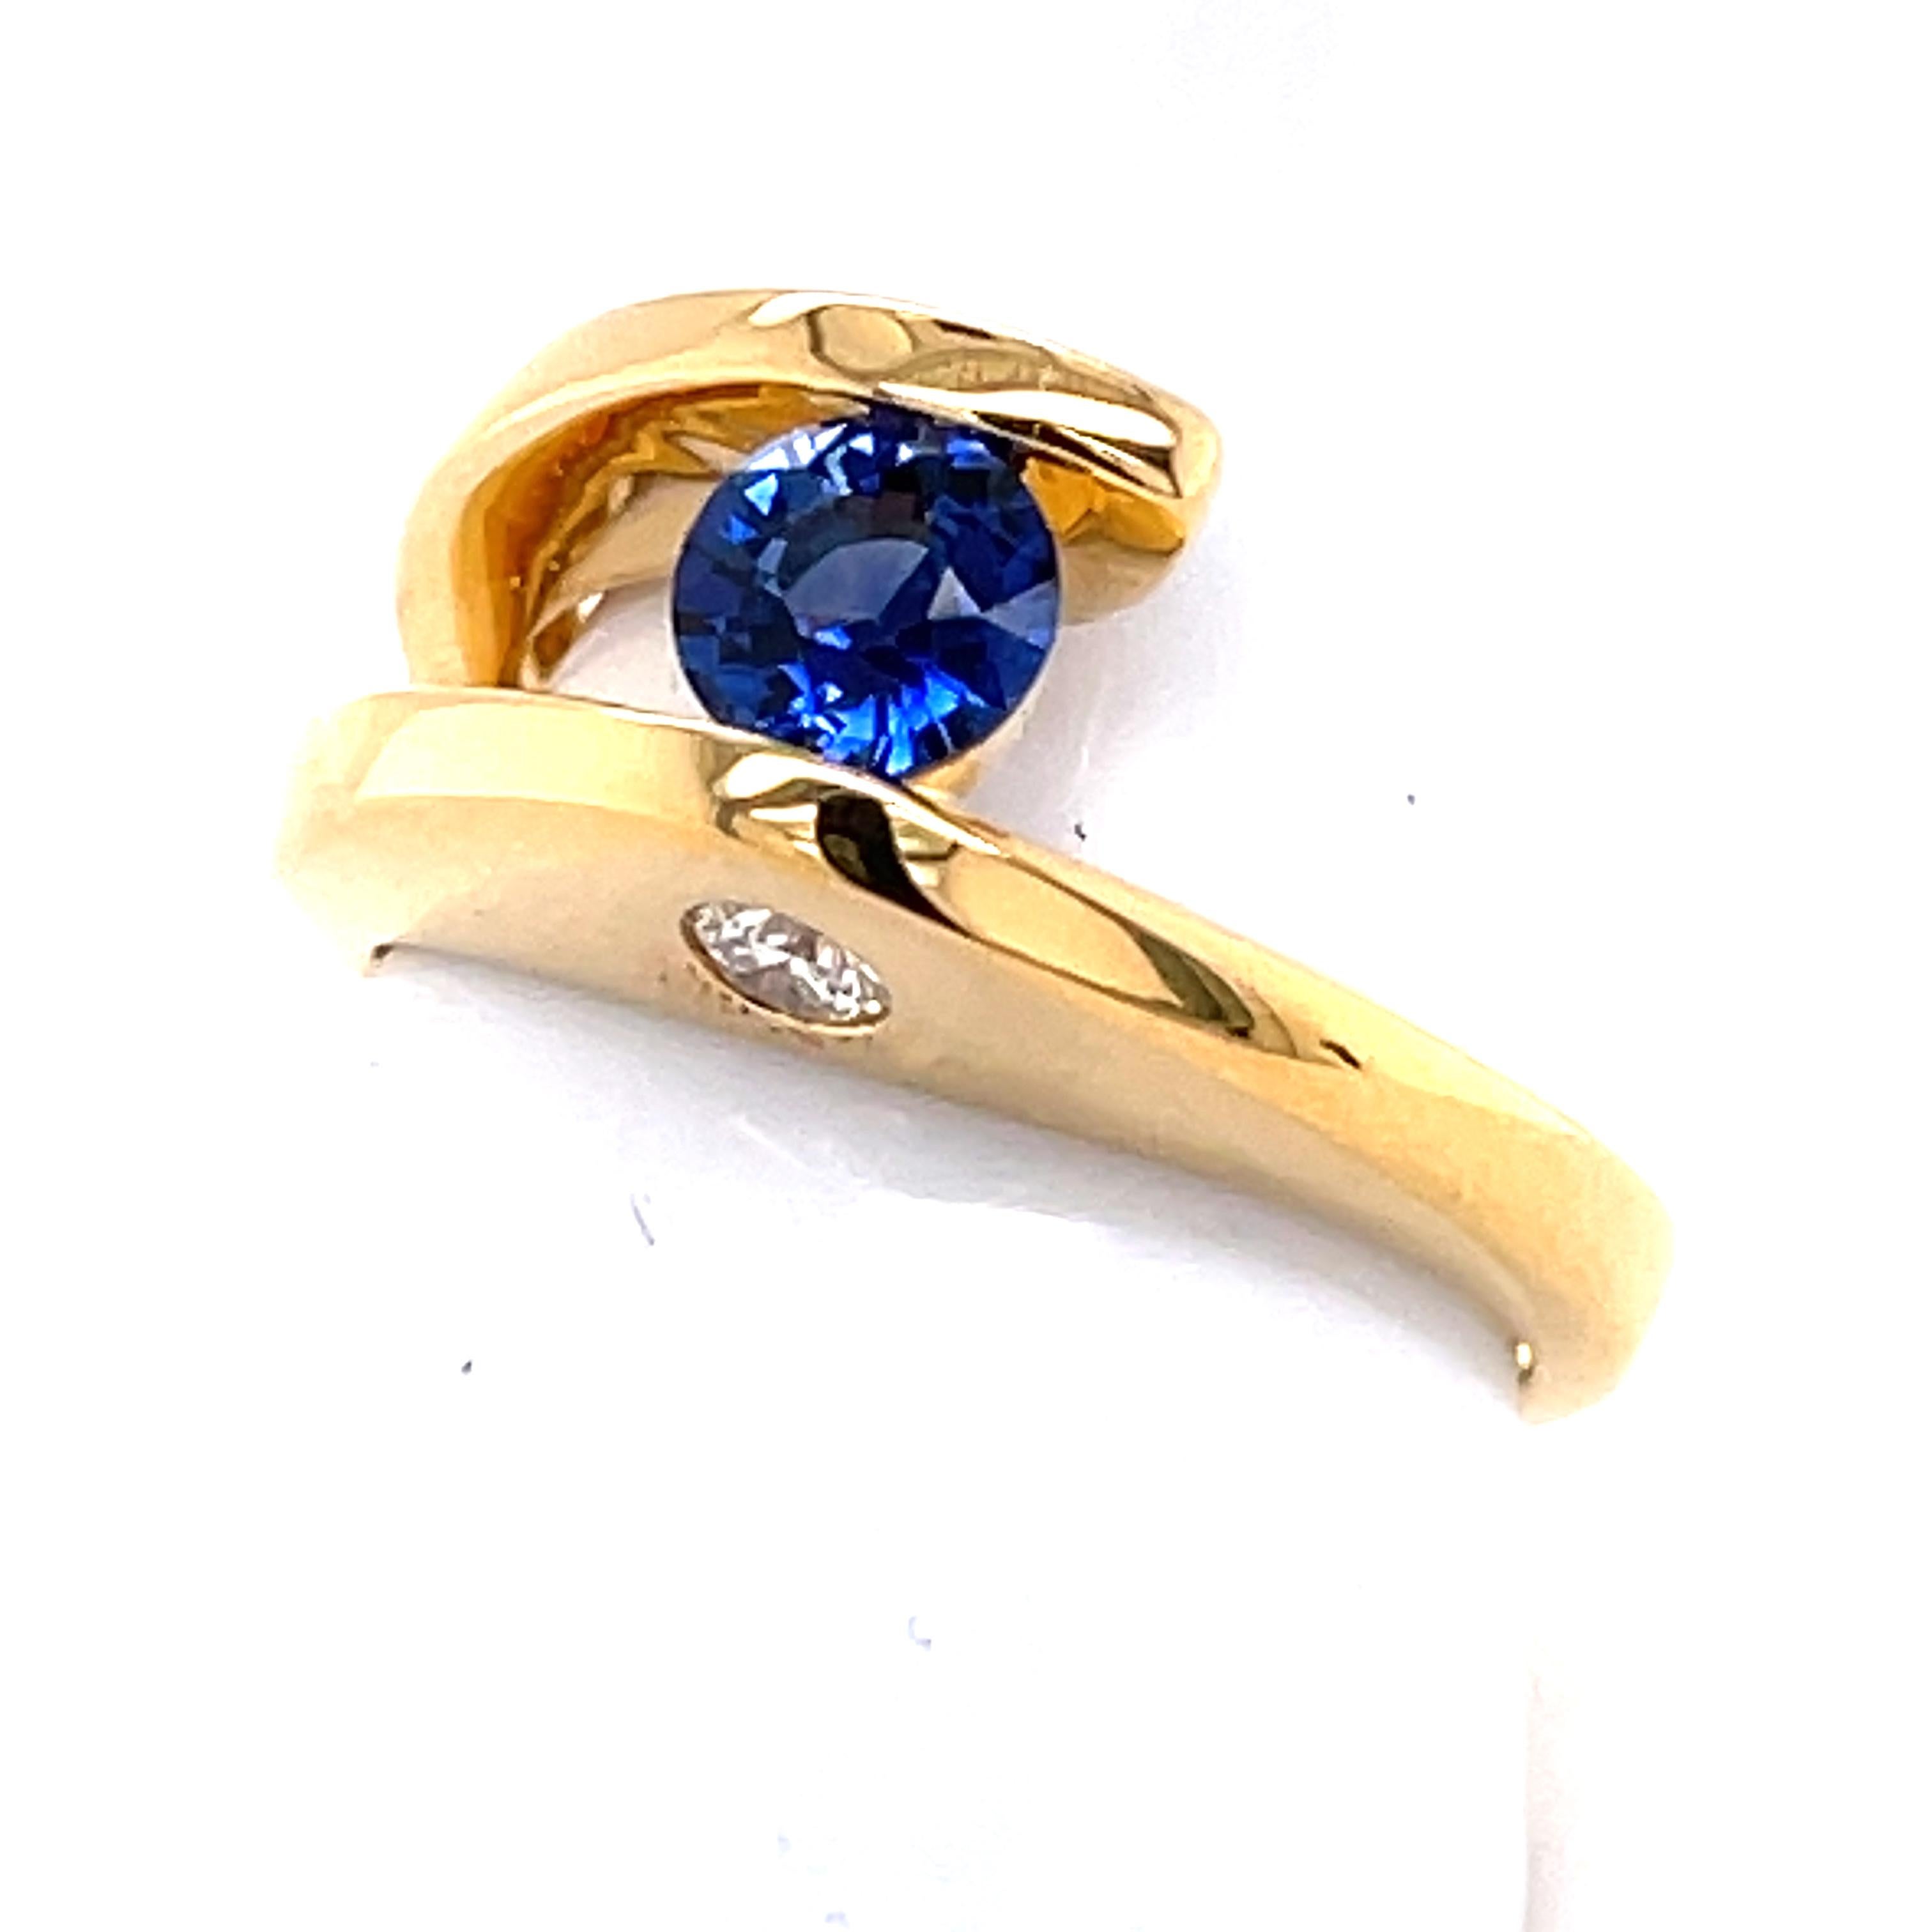 This modern bypass shank ring is done in 18-karat yellow gold. The tension set blue Sapphire center stone has a small basket for extra security  The one VS clarity and G color diamond is a surprise on the side of the ring and can be shown off to